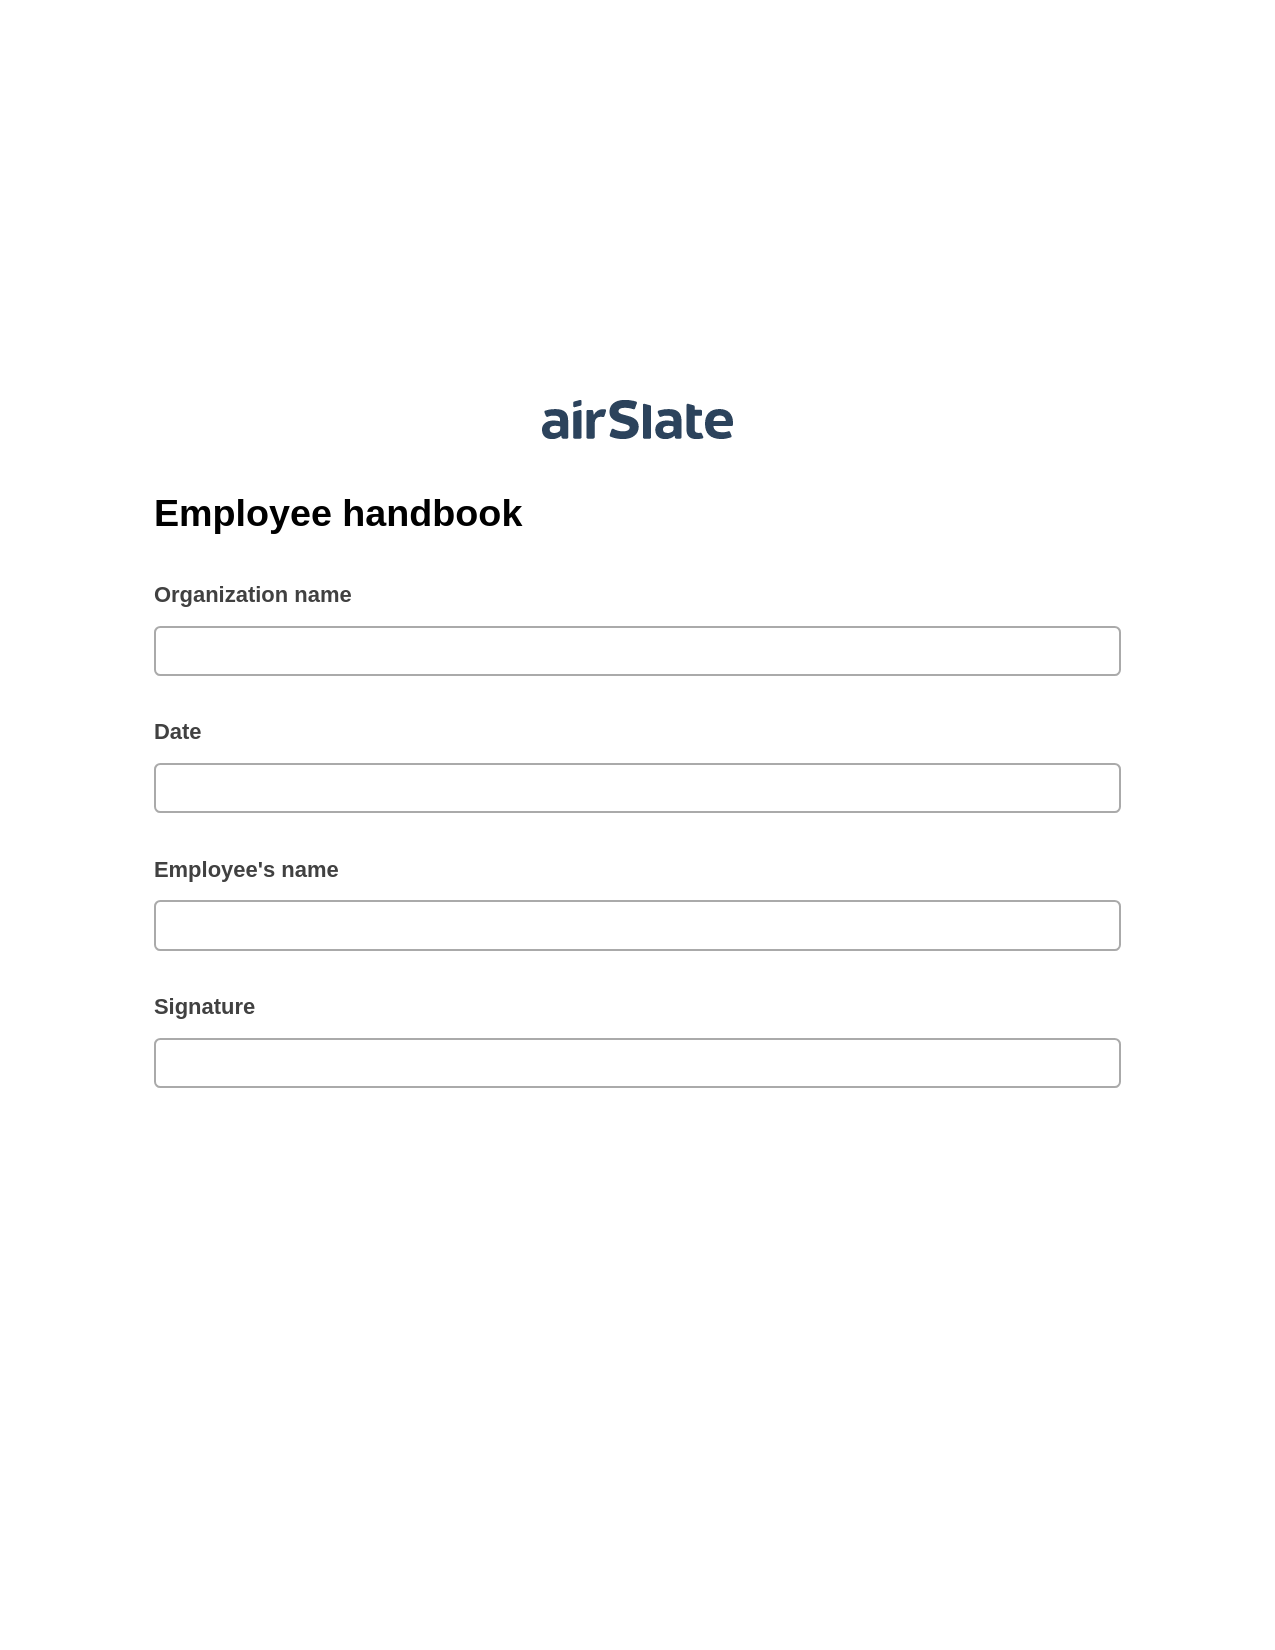 Multirole Employee handbook Pre-fill Document Bot, System Bot - Create a Slate in another Flow, OneDrive Bot